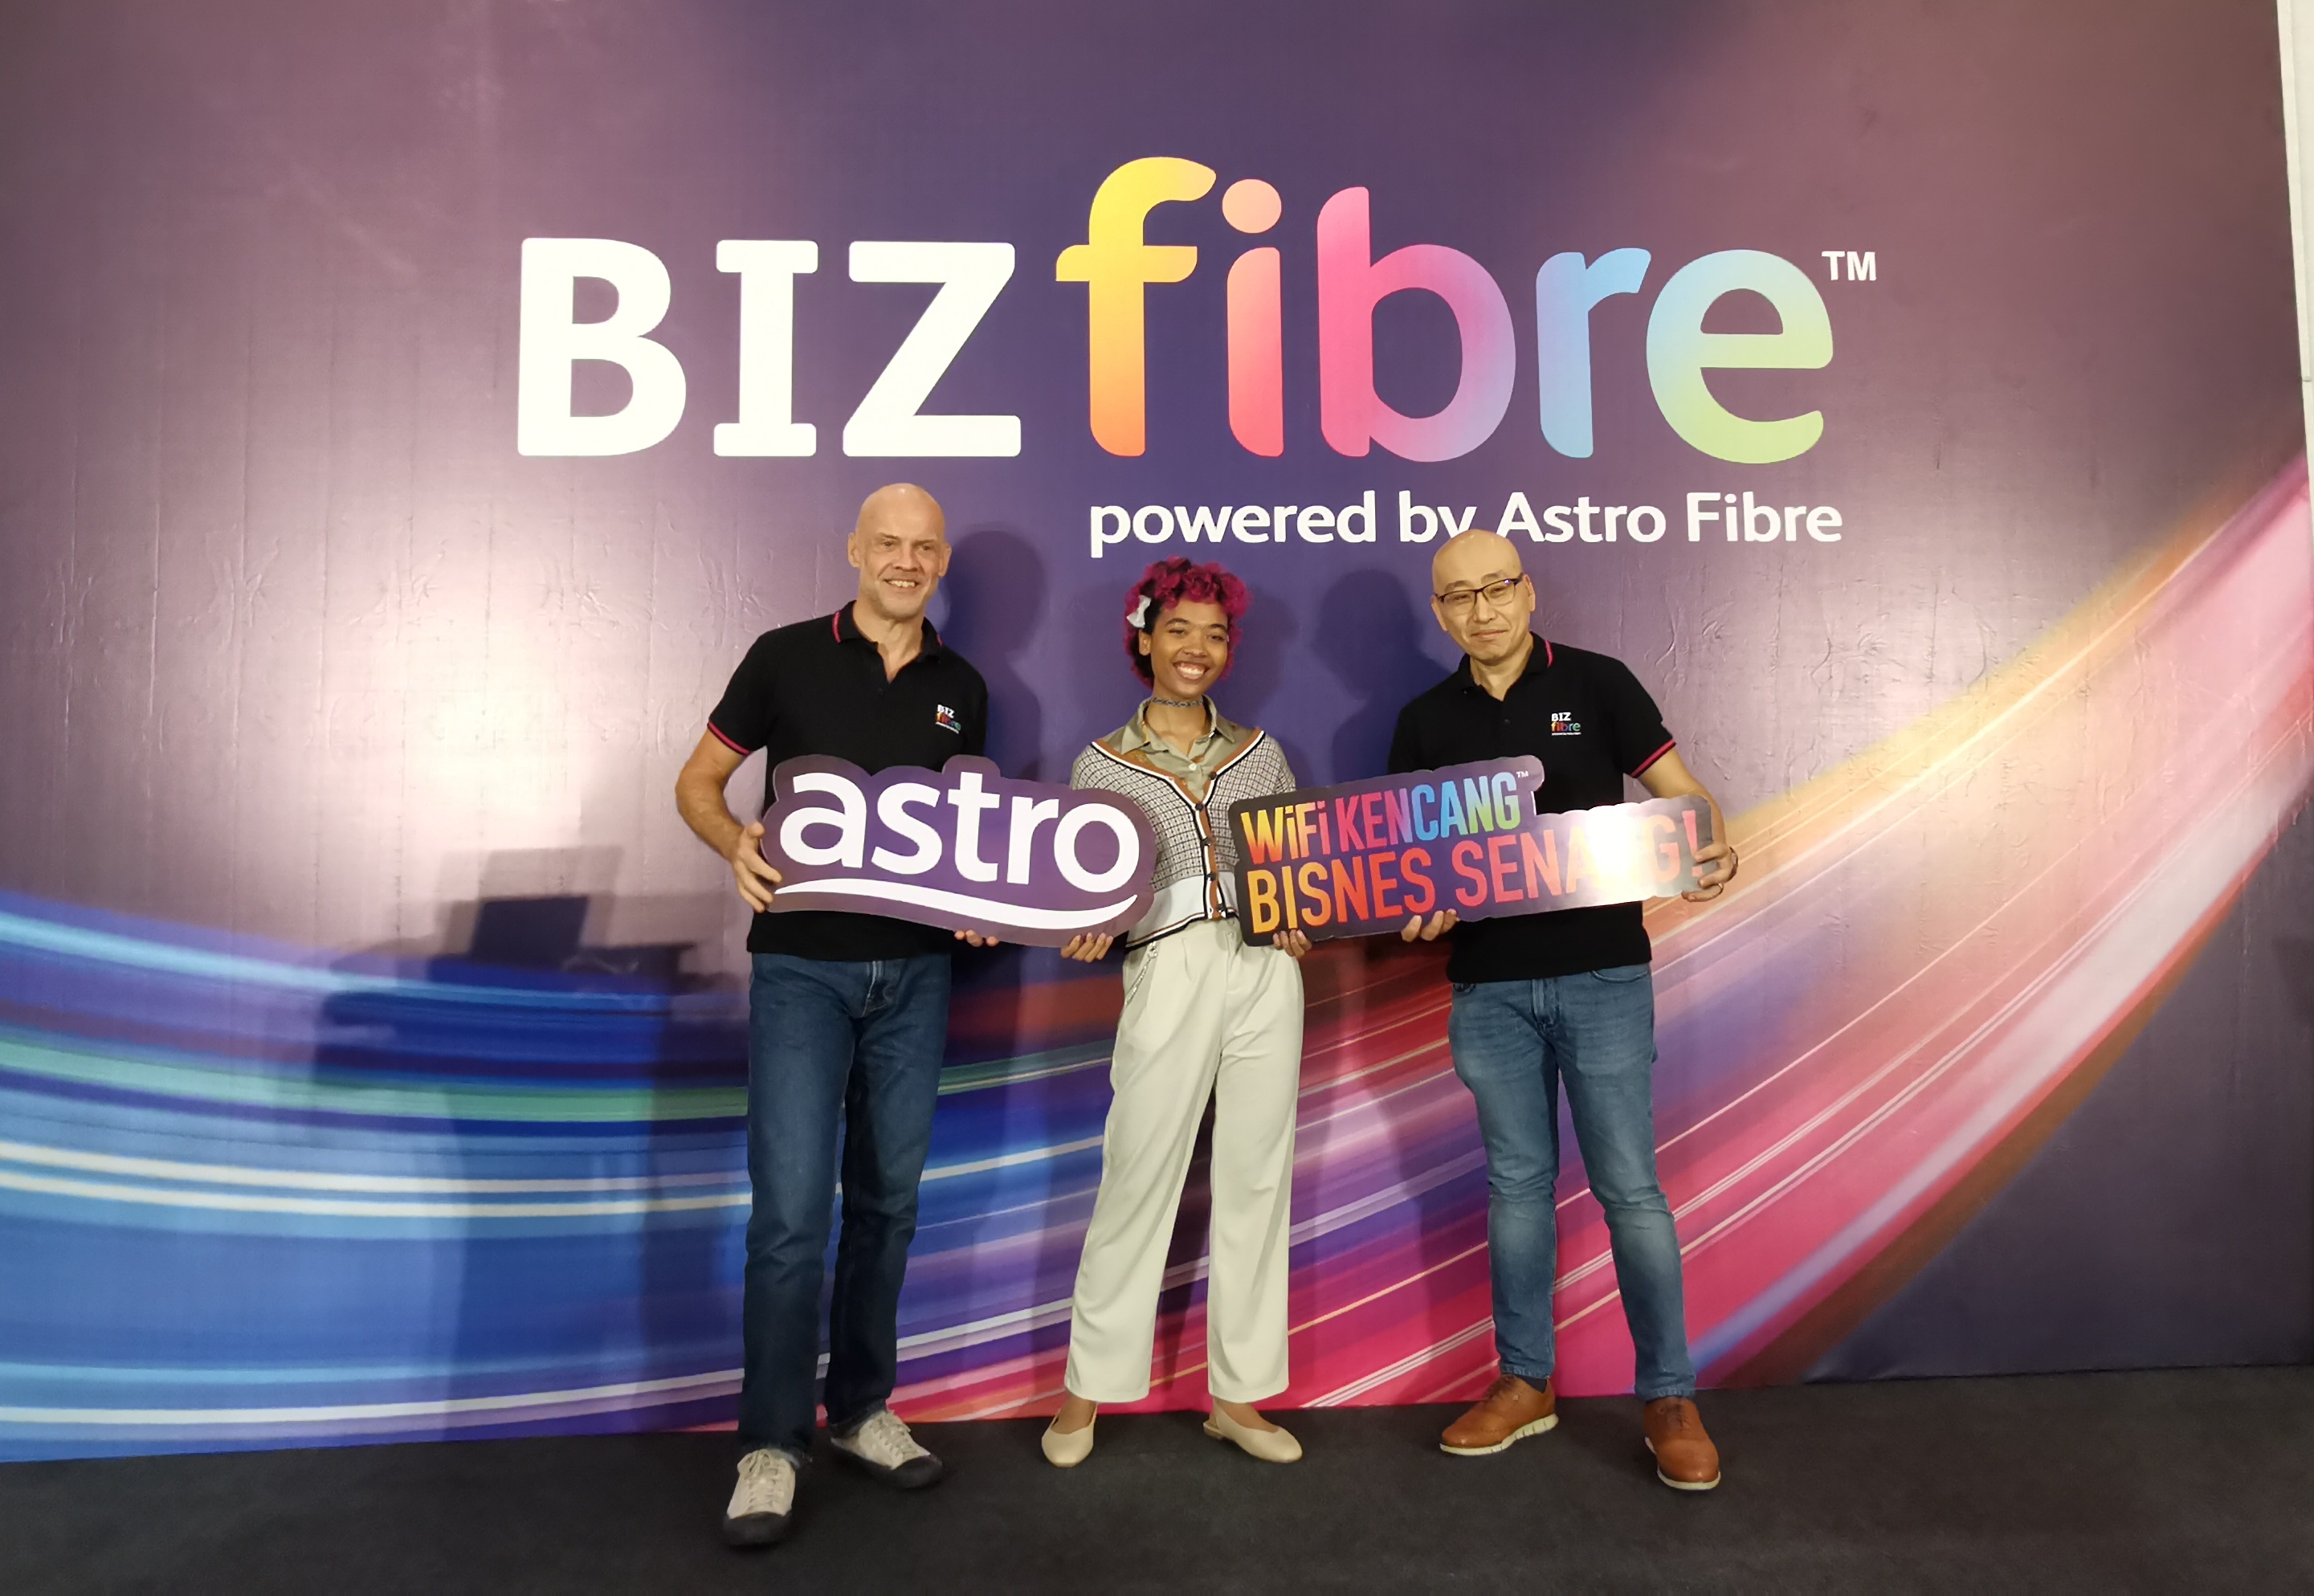 (From left) Euan Smith, Astro’s Group Chief Executive Officer – Designate; Arka, radio announcer of Hitz Sabah; and Kevin Ng, Astro’s Head of Enterprise Business in a group photo during the BIZfibre launch